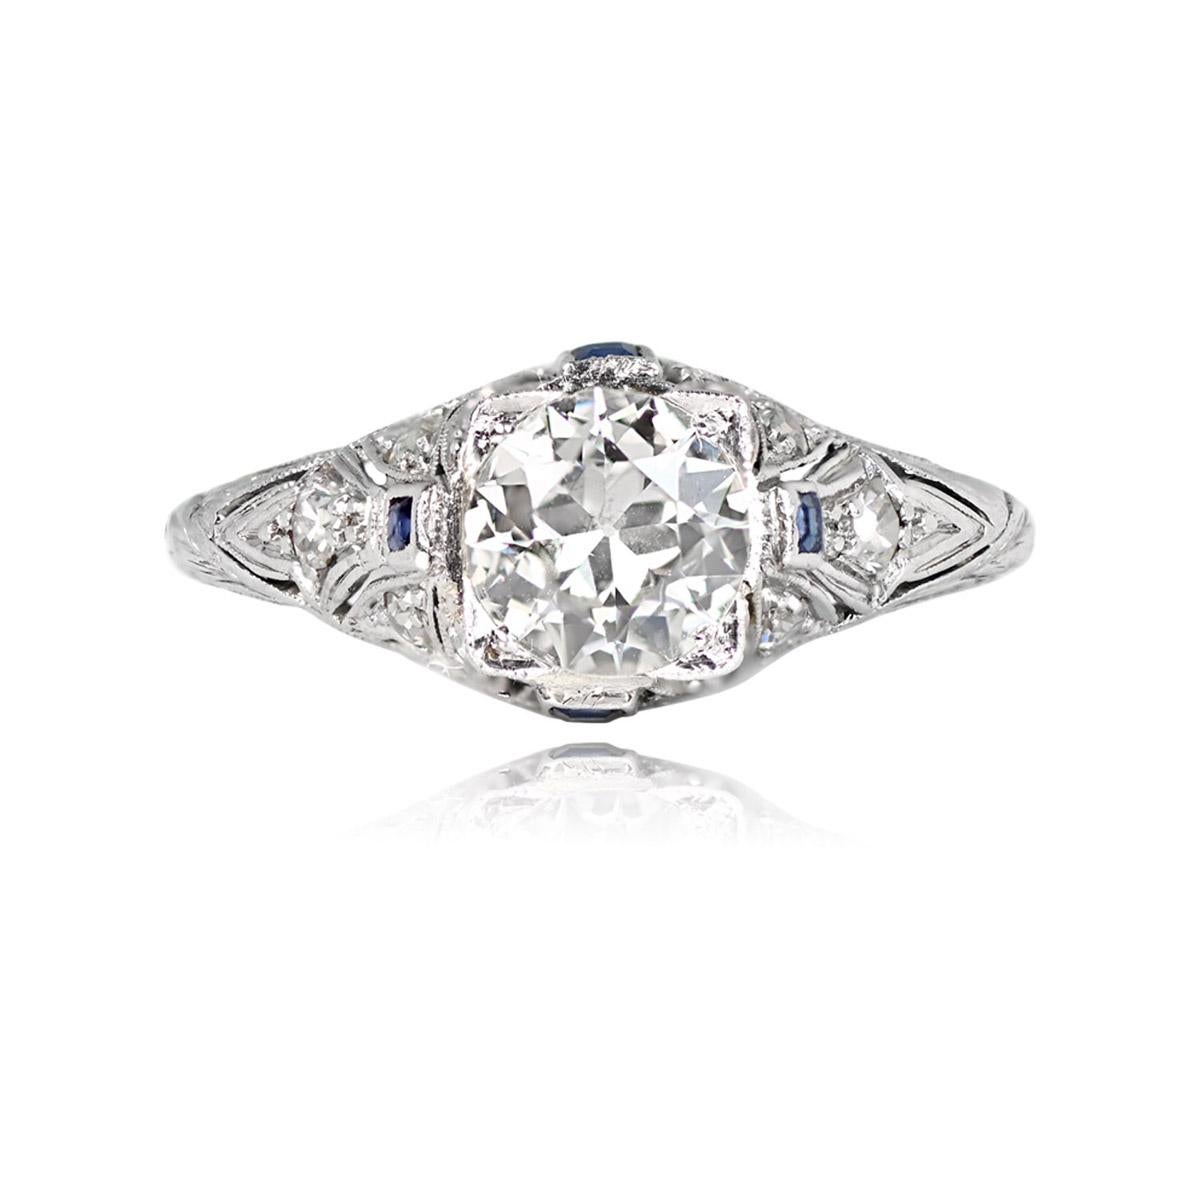 Vintage 1.20ct Old European Cut Diamond Engagement Ring, Platinum In Excellent Condition For Sale In New York, NY